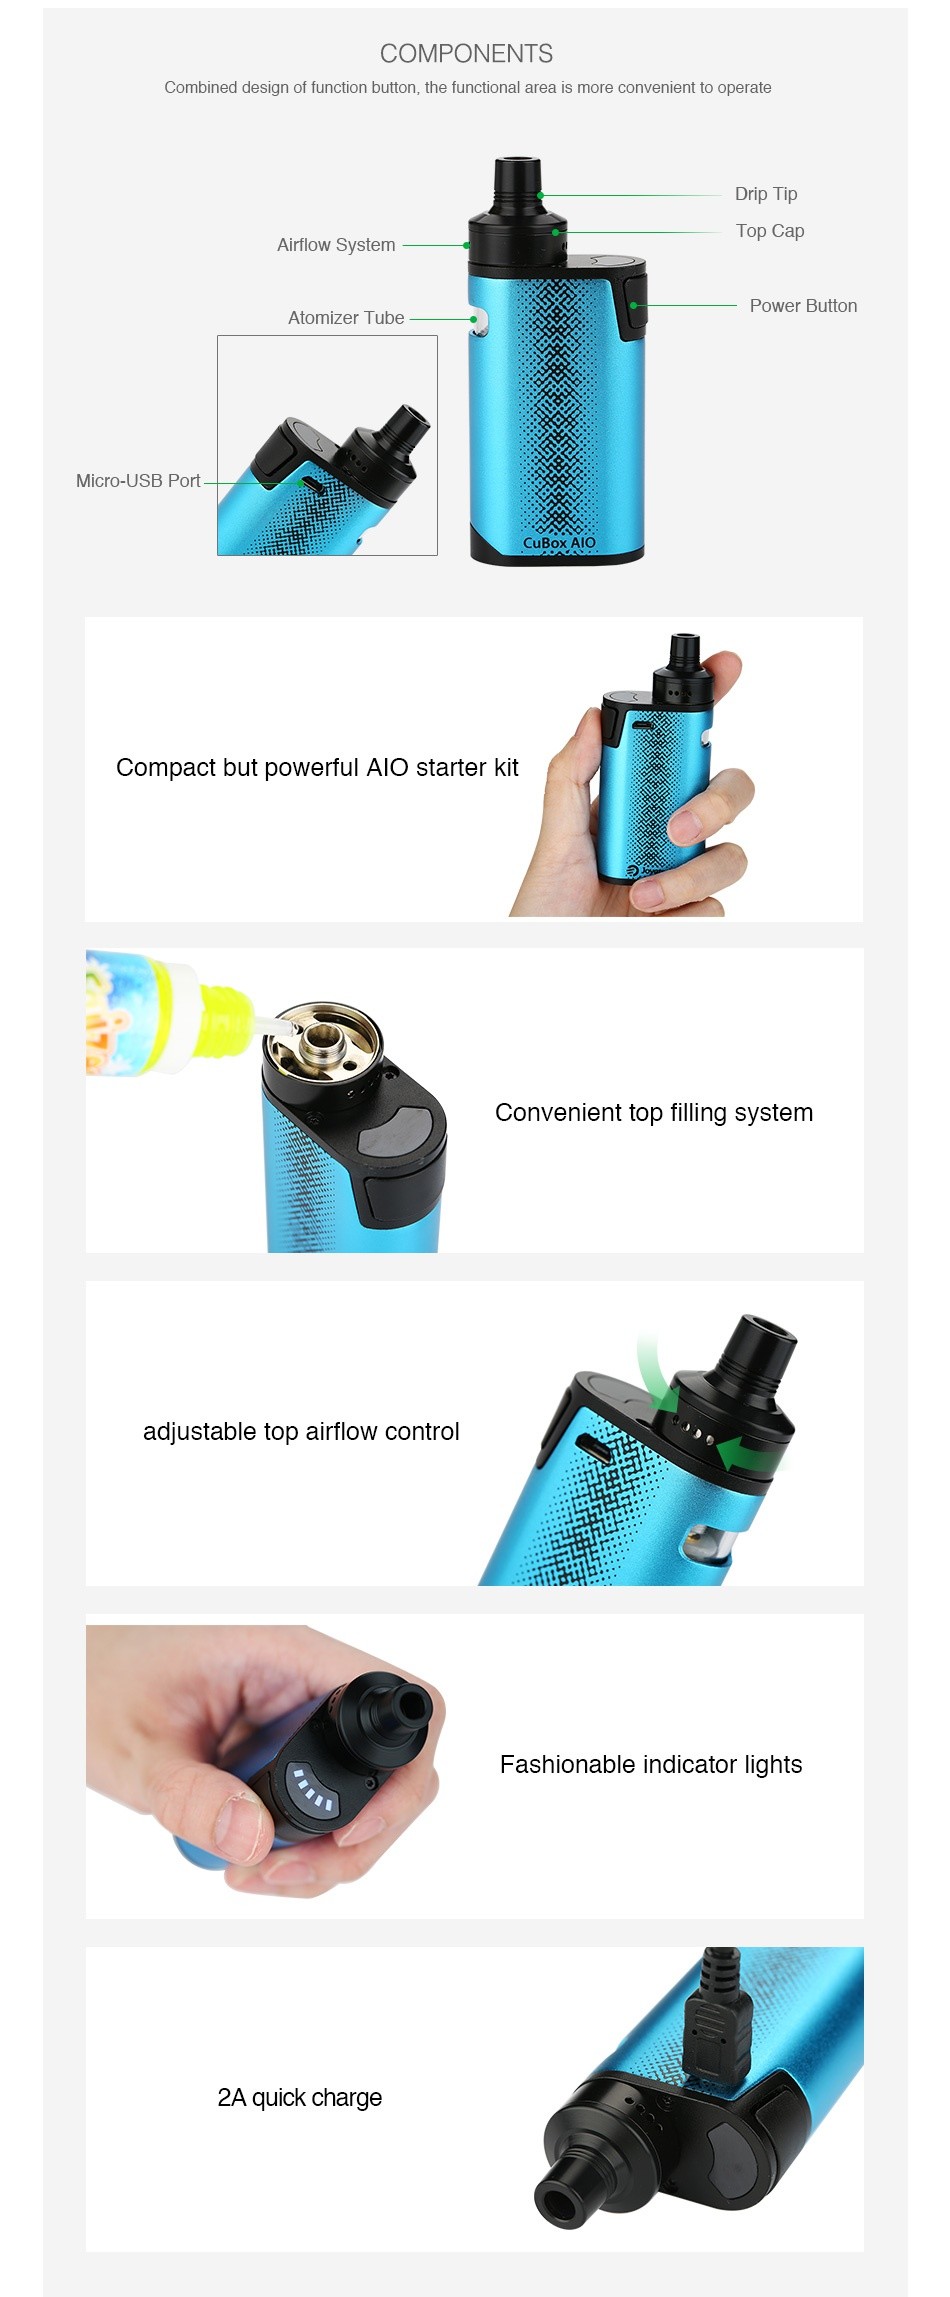 Joyetech CuBox AIO Starter Kit 2000mAh COMPONENTS combined design of function button  the functional area is more convenient to operate rip Tip Top Cap Airflow system Power Button AtomIzer Tube MiGro USB Port Compact but powerful Alo starter kit Convenient top filling system adjustable top airflow control Fashionable indicator lights 2A quick charge